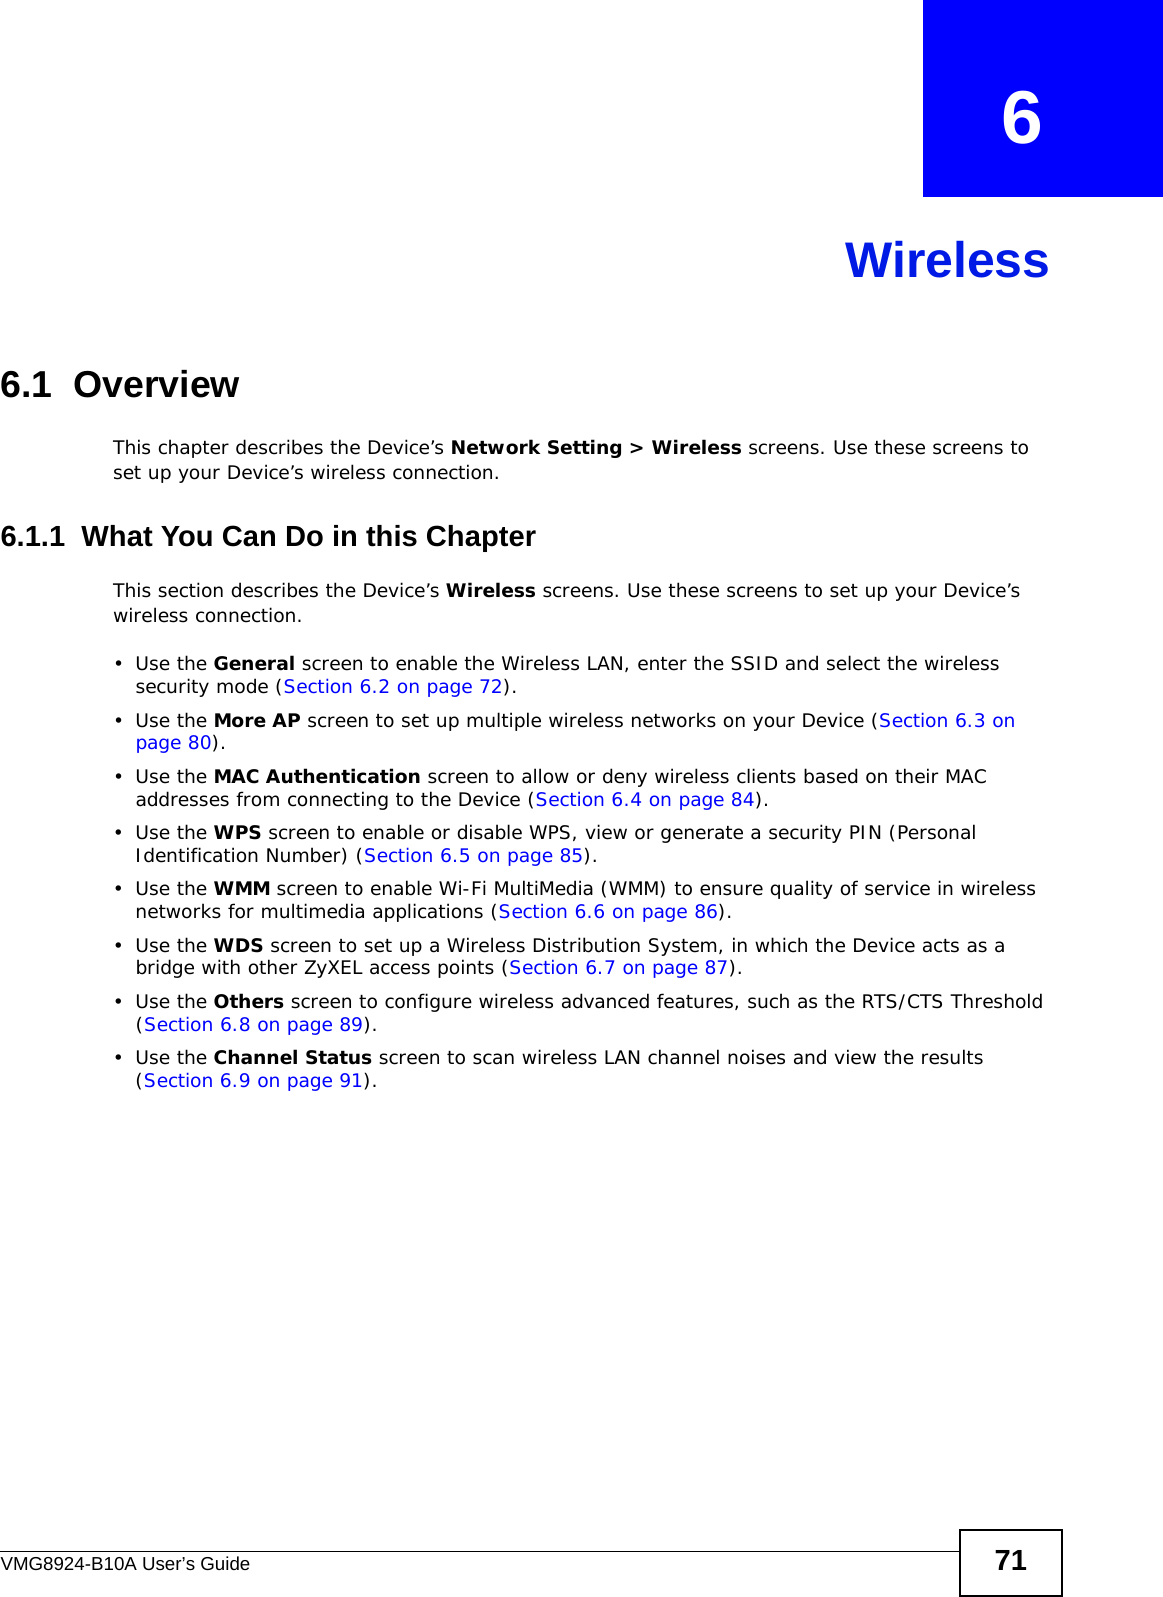 VMG8924-B10A User’s Guide 71CHAPTER   6Wireless6.1  Overview This chapter describes the Device’s Network Setting &gt; Wireless screens. Use these screens to set up your Device’s wireless connection.6.1.1  What You Can Do in this ChapterThis section describes the Device’s Wireless screens. Use these screens to set up your Device’s wireless connection.•Use the General screen to enable the Wireless LAN, enter the SSID and select the wireless security mode (Section 6.2 on page 72).•Use the More AP screen to set up multiple wireless networks on your Device (Section 6.3 on page 80).•Use the MAC Authentication screen to allow or deny wireless clients based on their MAC addresses from connecting to the Device (Section 6.4 on page 84).•Use the WPS screen to enable or disable WPS, view or generate a security PIN (Personal Identification Number) (Section 6.5 on page 85).•Use the WMM screen to enable Wi-Fi MultiMedia (WMM) to ensure quality of service in wireless networks for multimedia applications (Section 6.6 on page 86). •Use the WDS screen to set up a Wireless Distribution System, in which the Device acts as a bridge with other ZyXEL access points (Section 6.7 on page 87).•Use the Others screen to configure wireless advanced features, such as the RTS/CTS Threshold (Section 6.8 on page 89).•Use the Channel Status screen to scan wireless LAN channel noises and view the results (Section 6.9 on page 91).